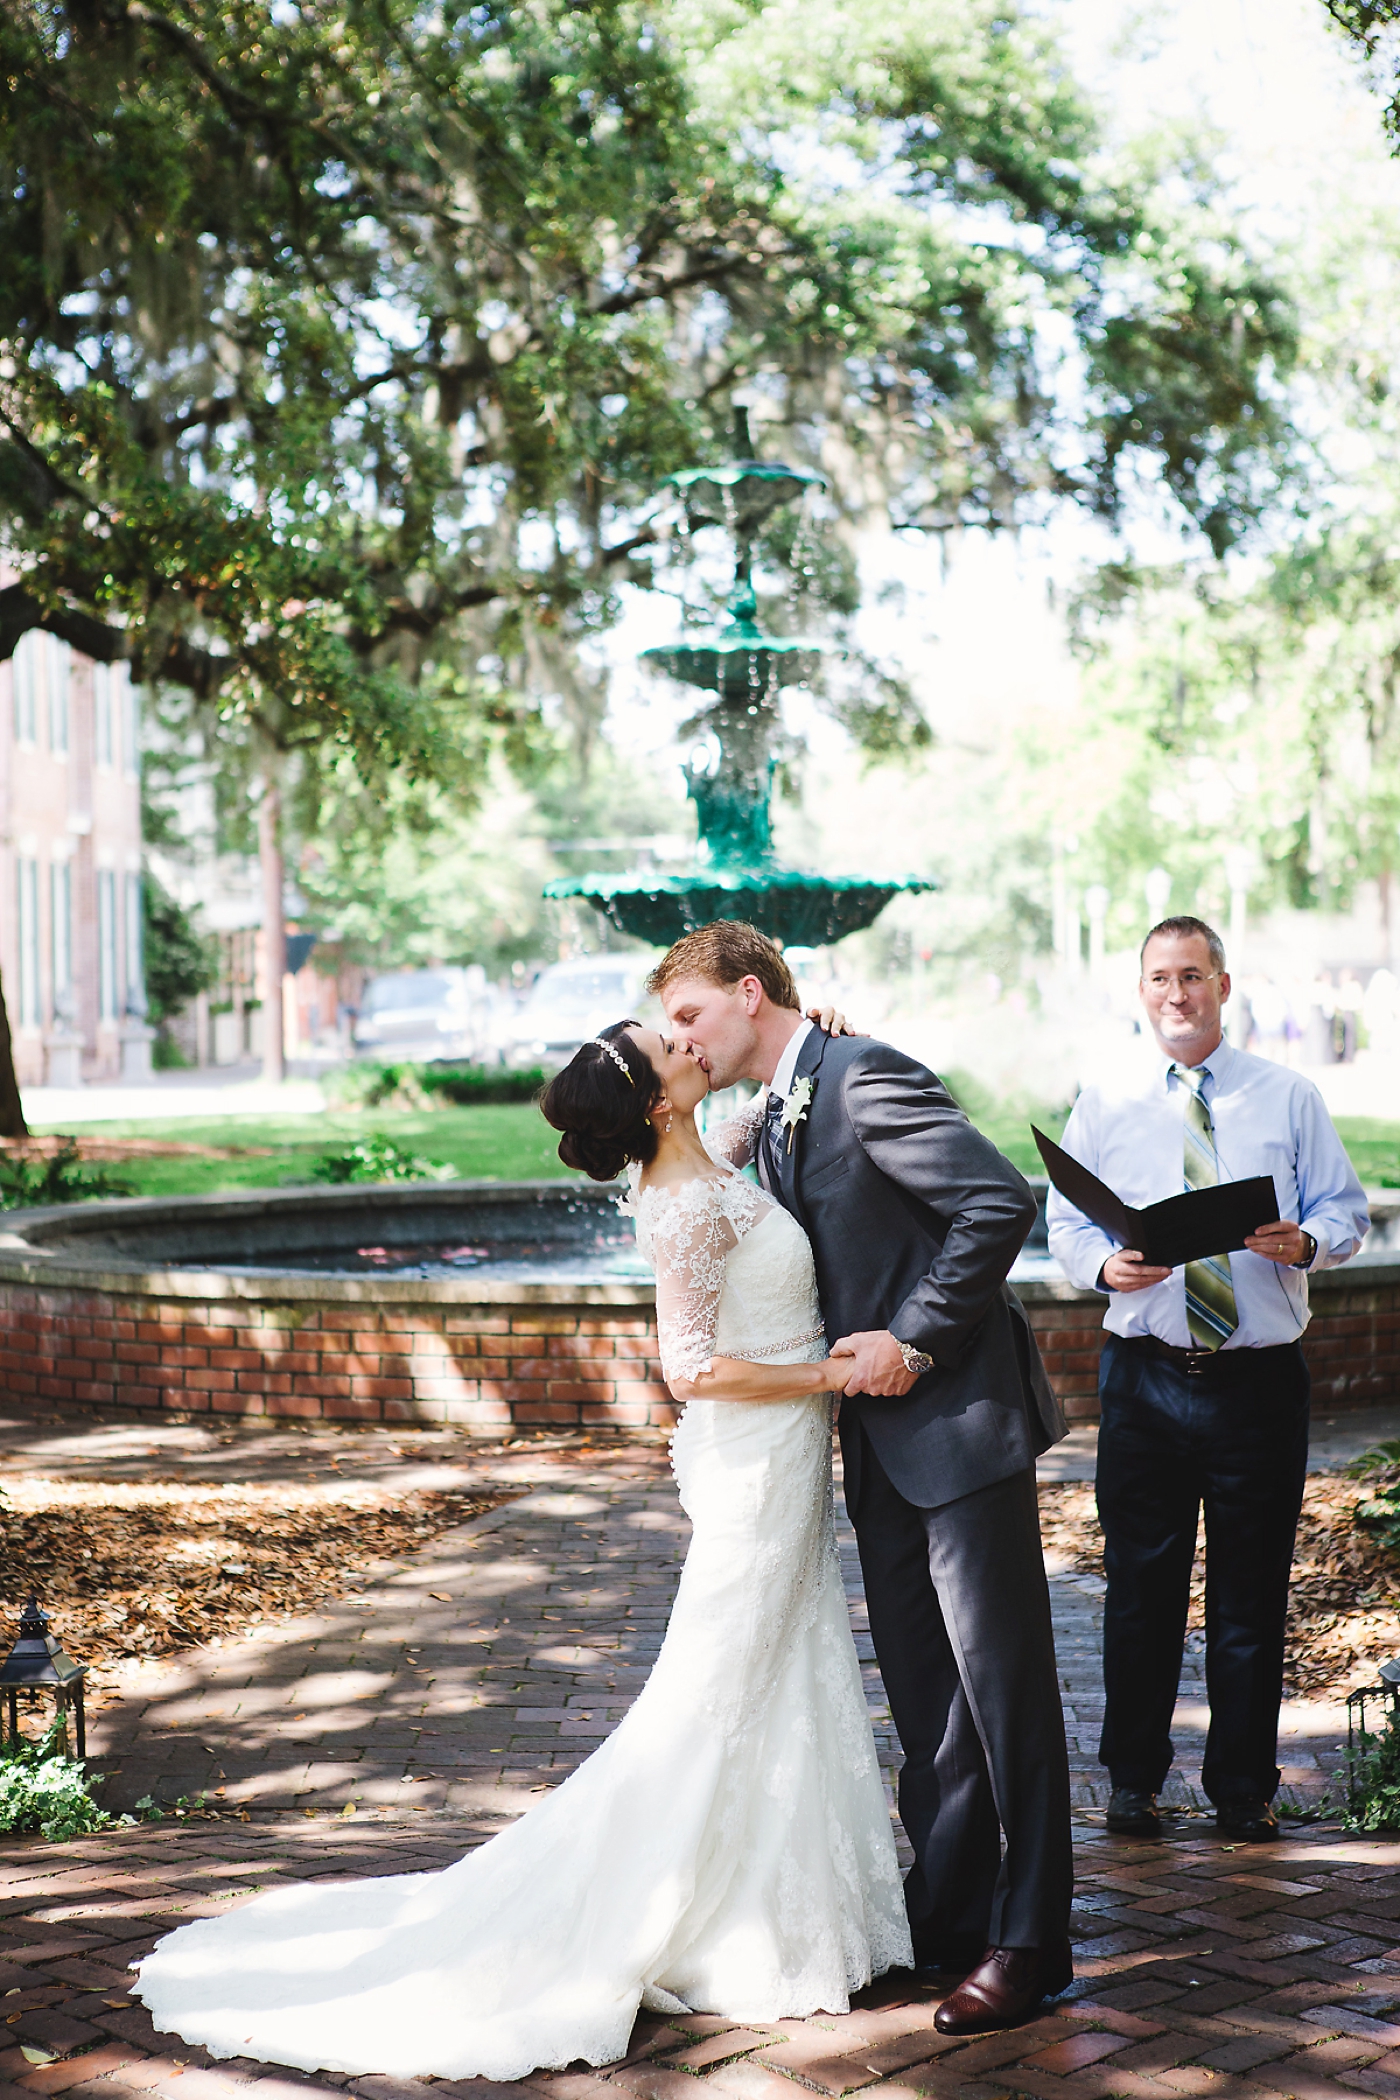 Lafayette Square Elopement in Savannah - Izzy and Co.